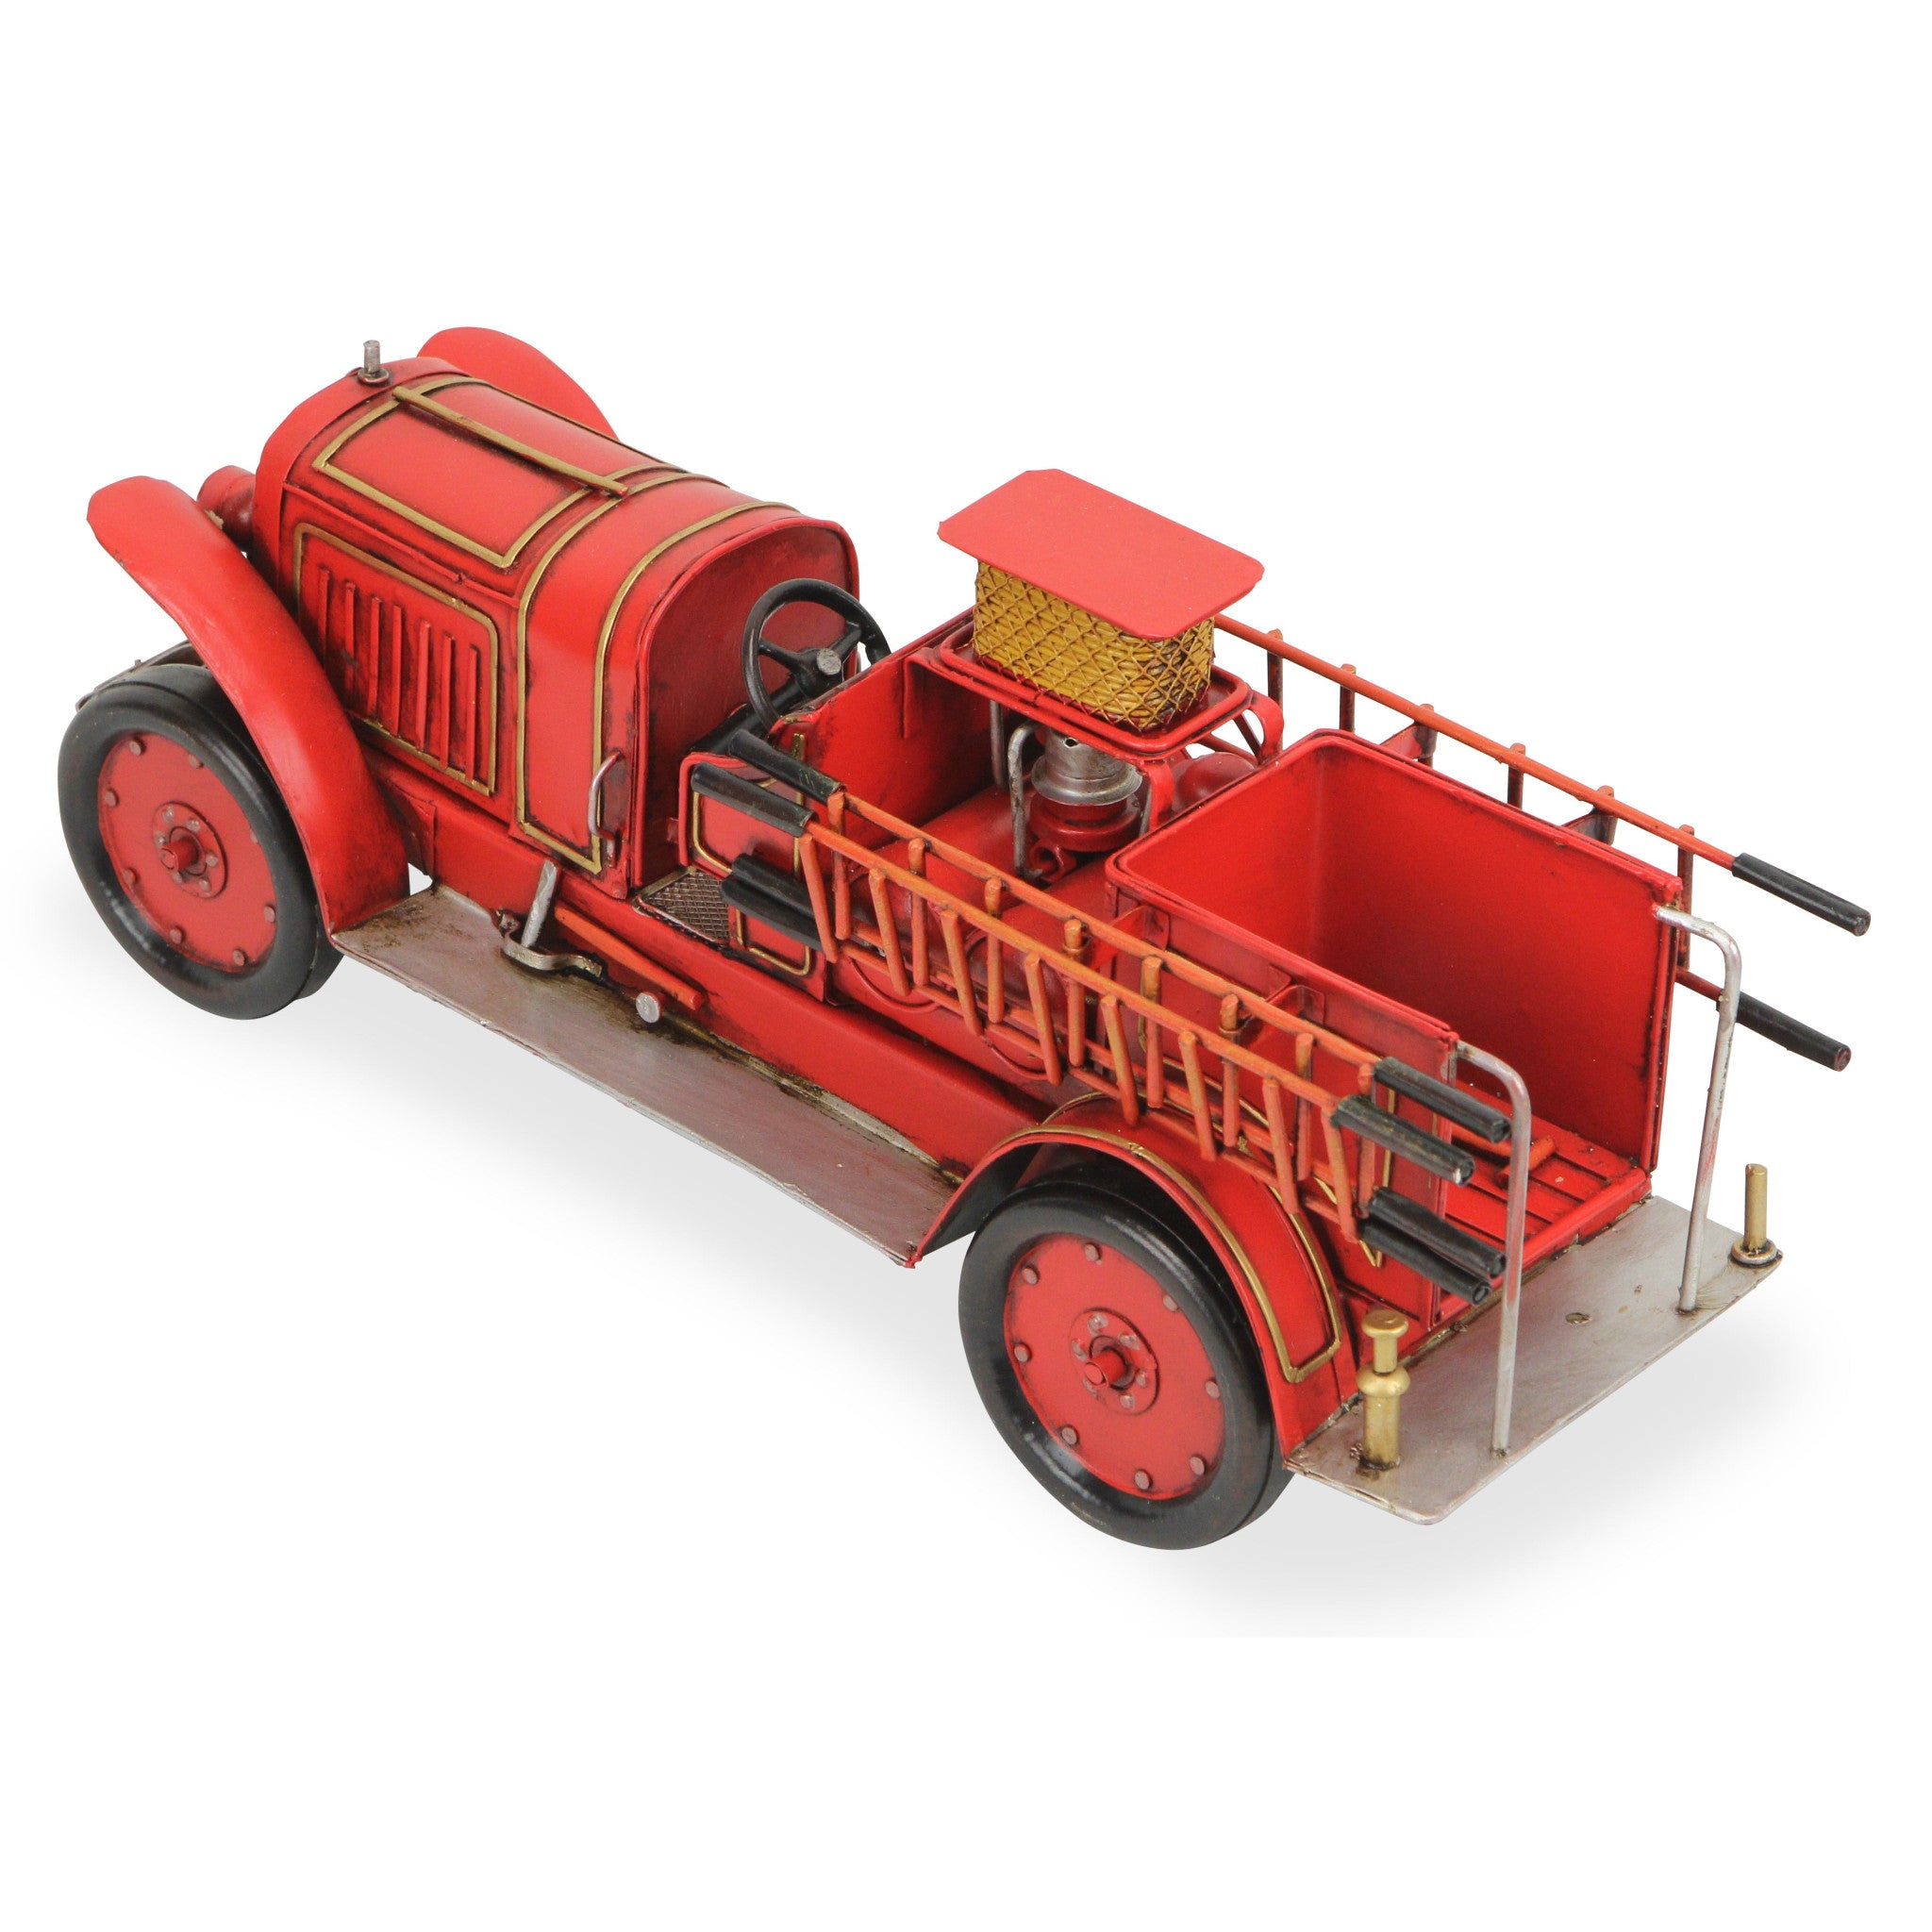 7" Red and Gold Metal Hand Painted Model Car